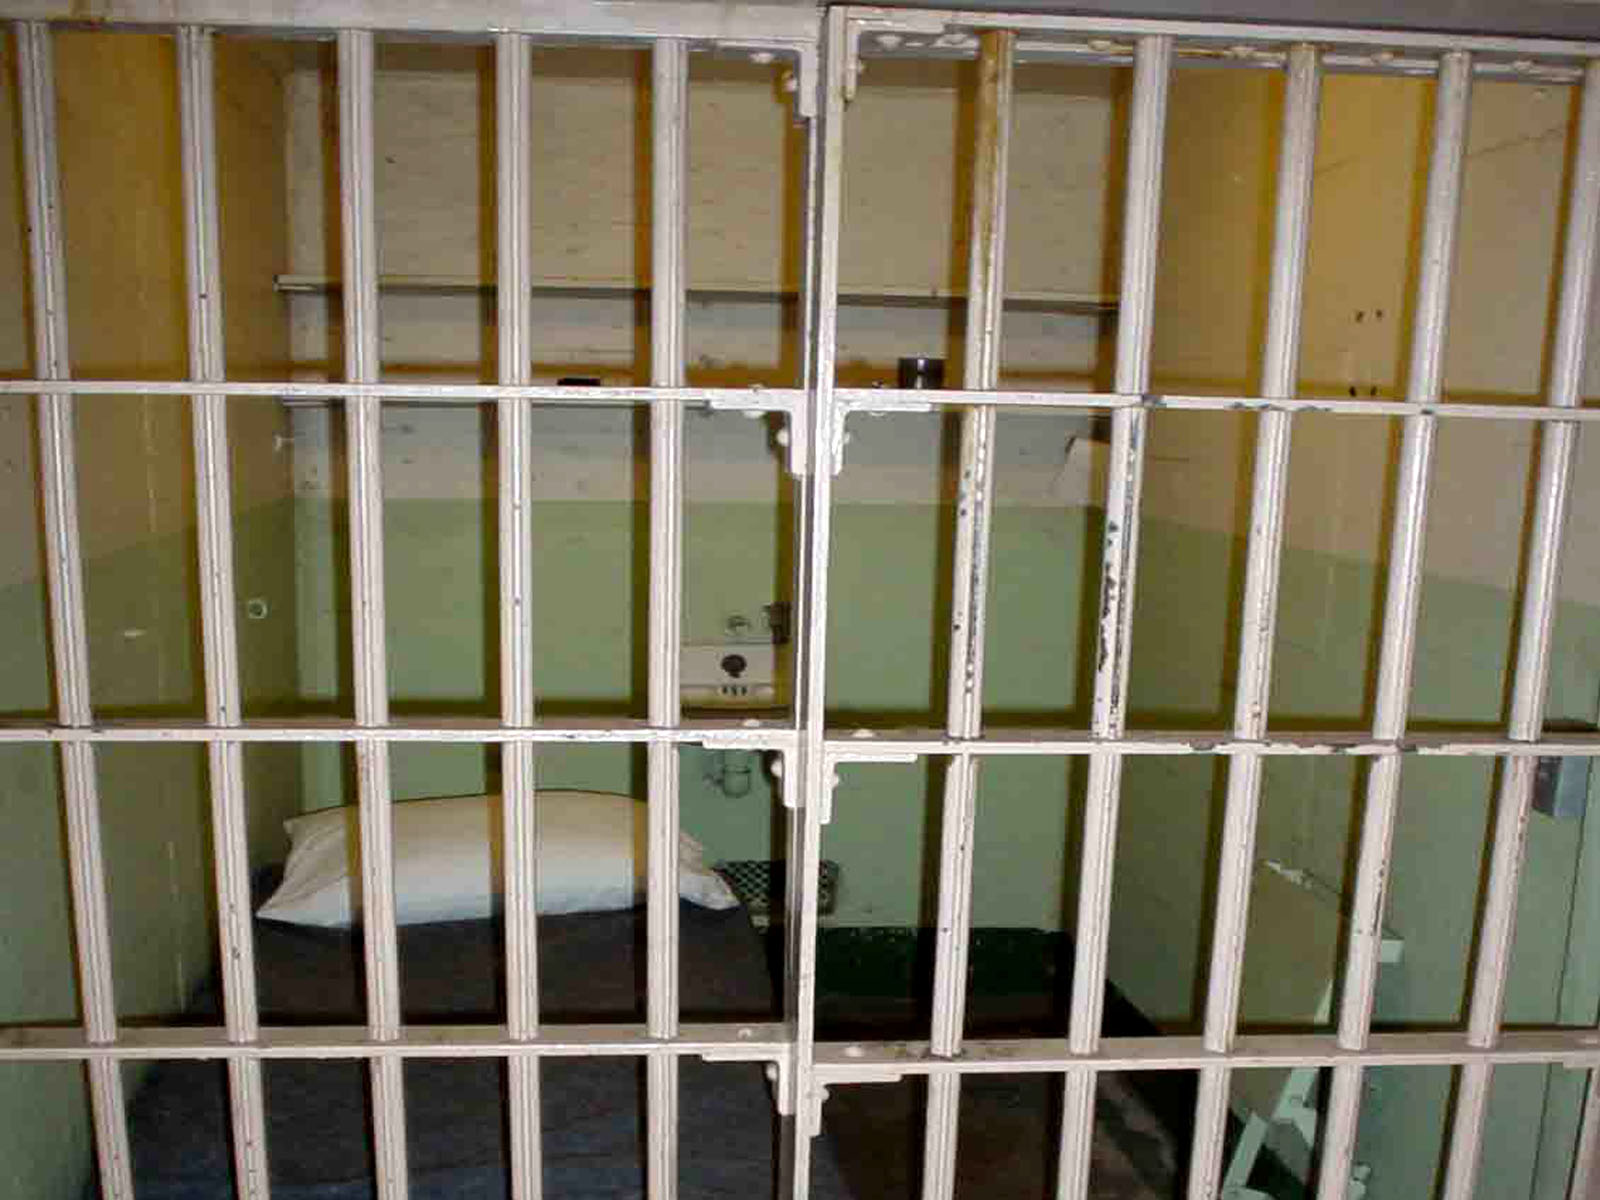  jail cell wallpaper displaying 19 images for jail cell wallpaper 1600x1200